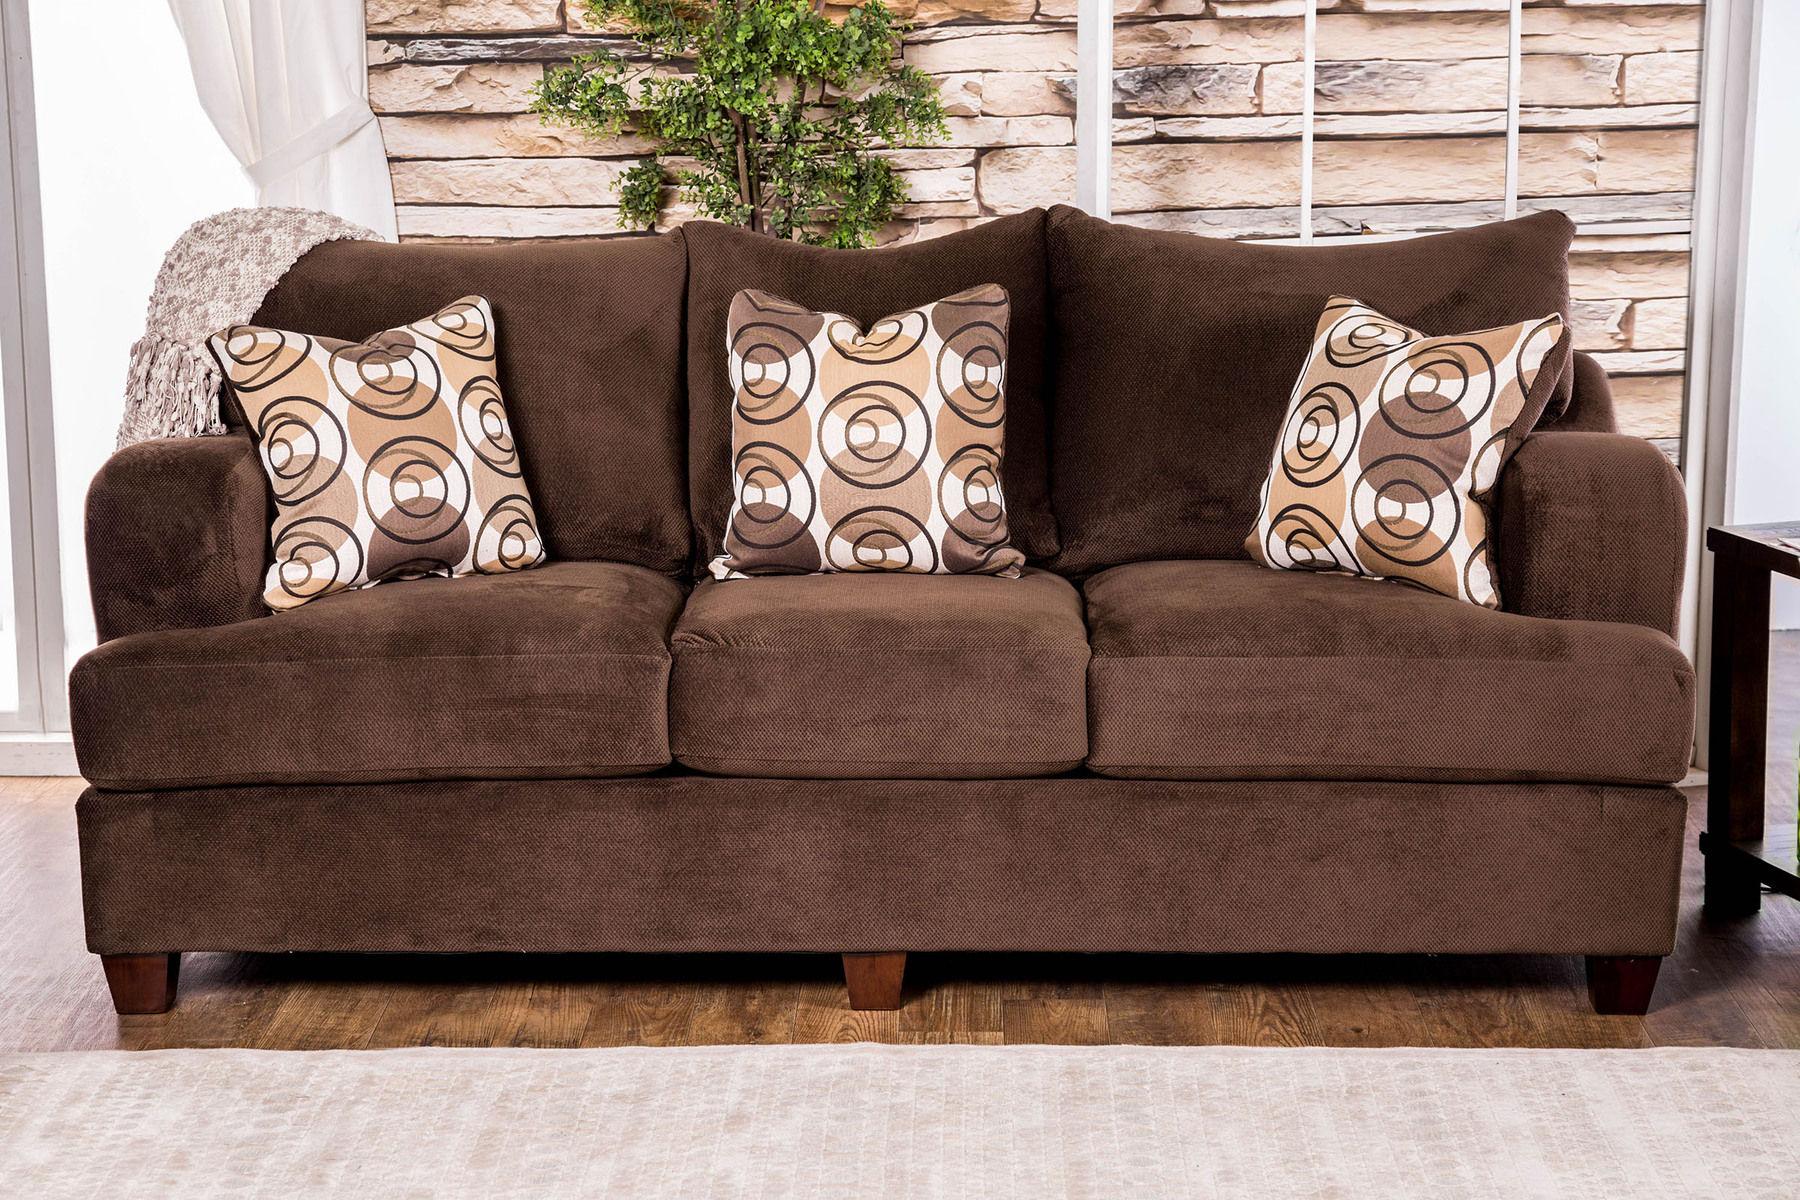 Transitional Sofa WESSINGTON SM6131-SF SM6131-SF in Chocolate Chenille